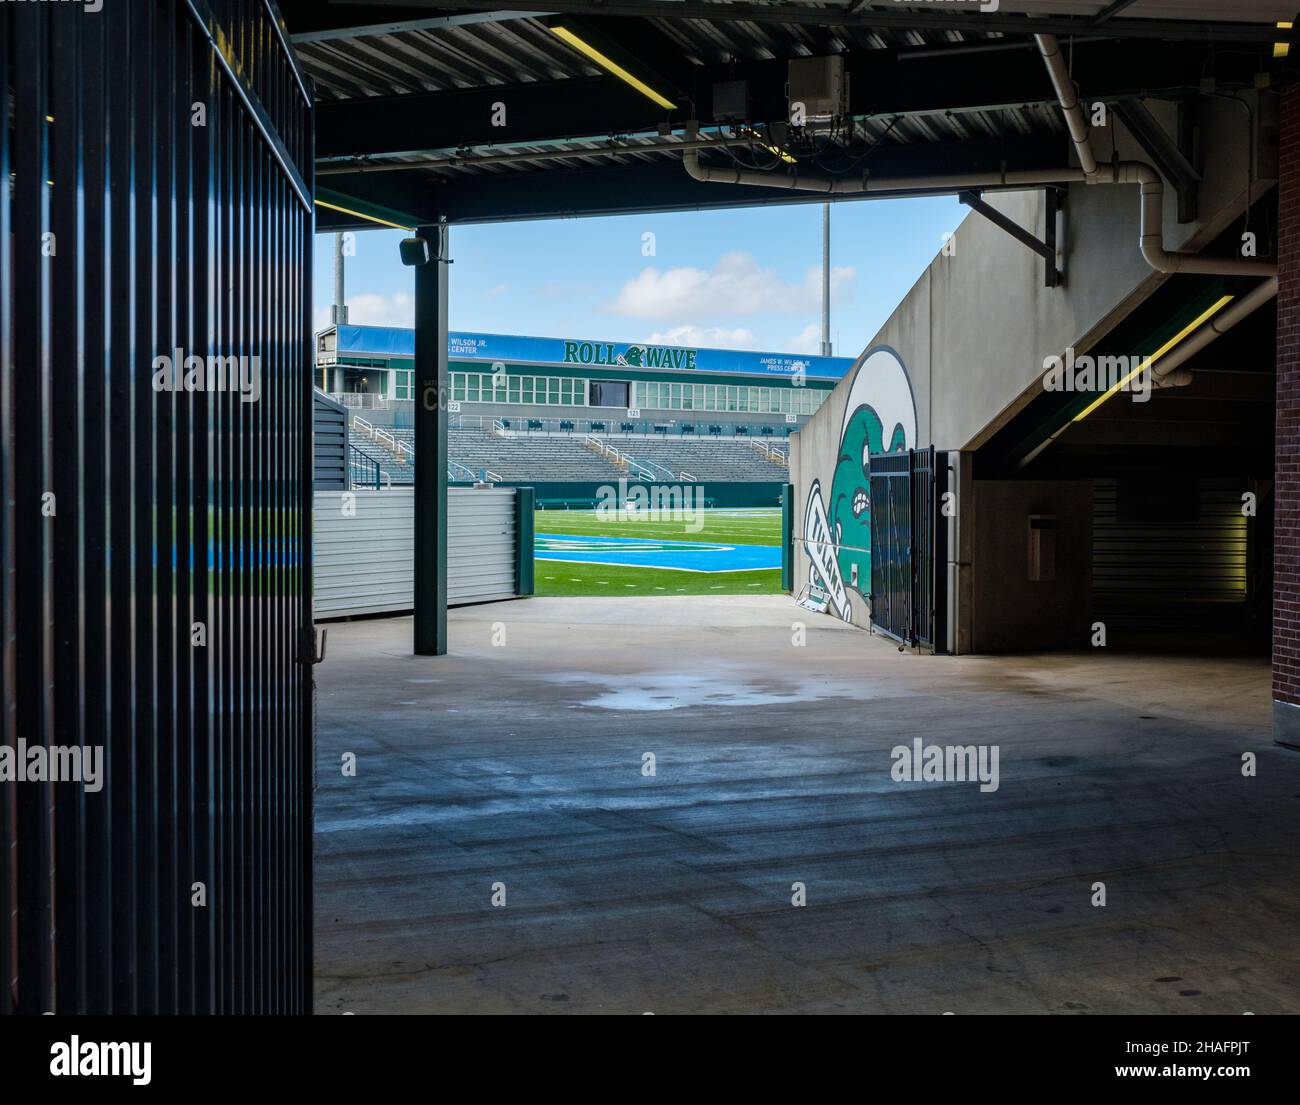 NEW ORLEANS, LA, USA - DECEMBER 10, 2021: Birdoff Family Student Tunnel at Yulman Stadium with view of stands, press box and football field Stock Photo